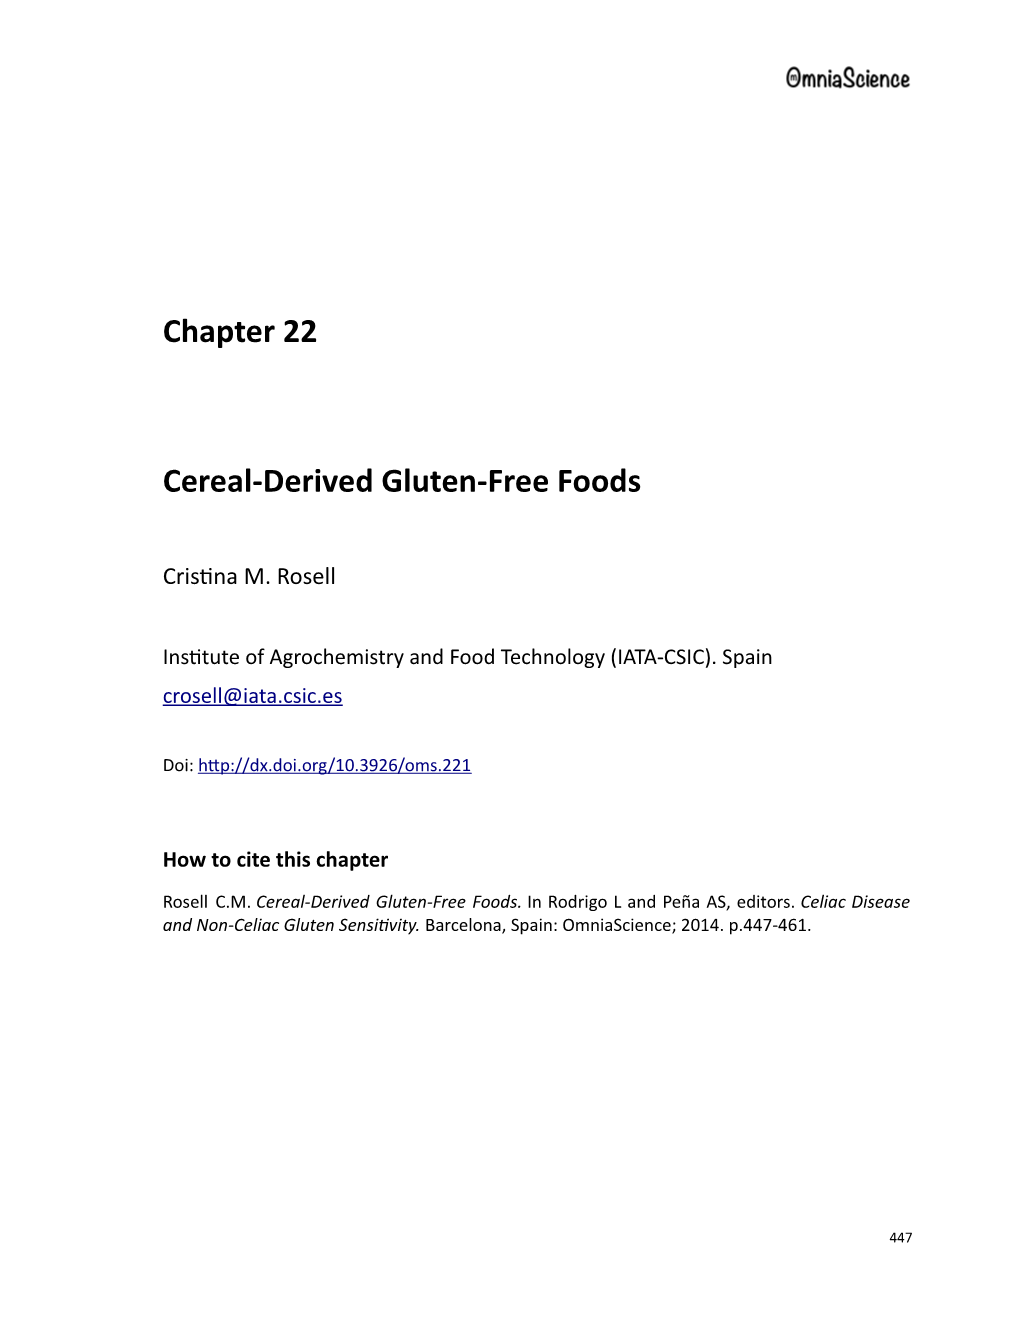 Chapter 22 Cereal-Derived Gluten-Free Foods